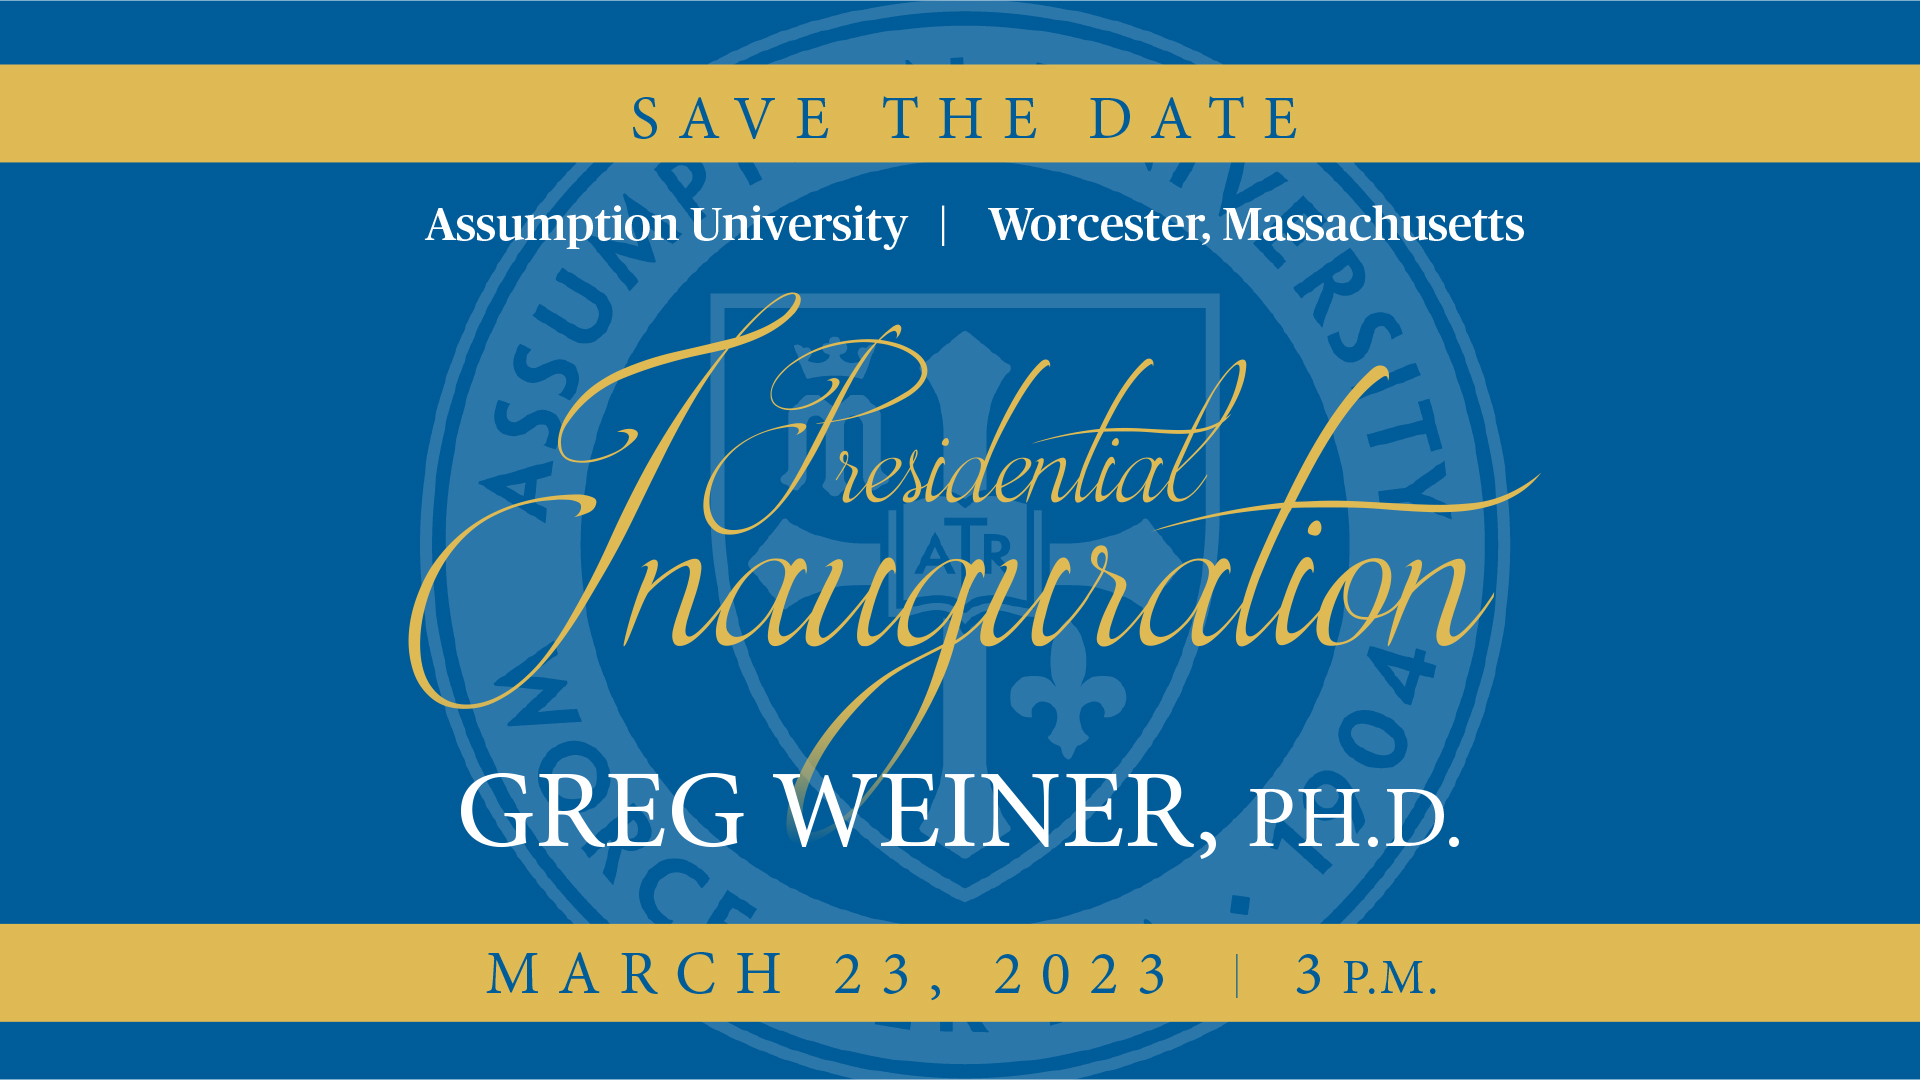 Assumption University President Greg Weiner will have his inauguration on March 23, 2023 in the Plourde Recreation Center on Assumption University's Worcester, MA campus